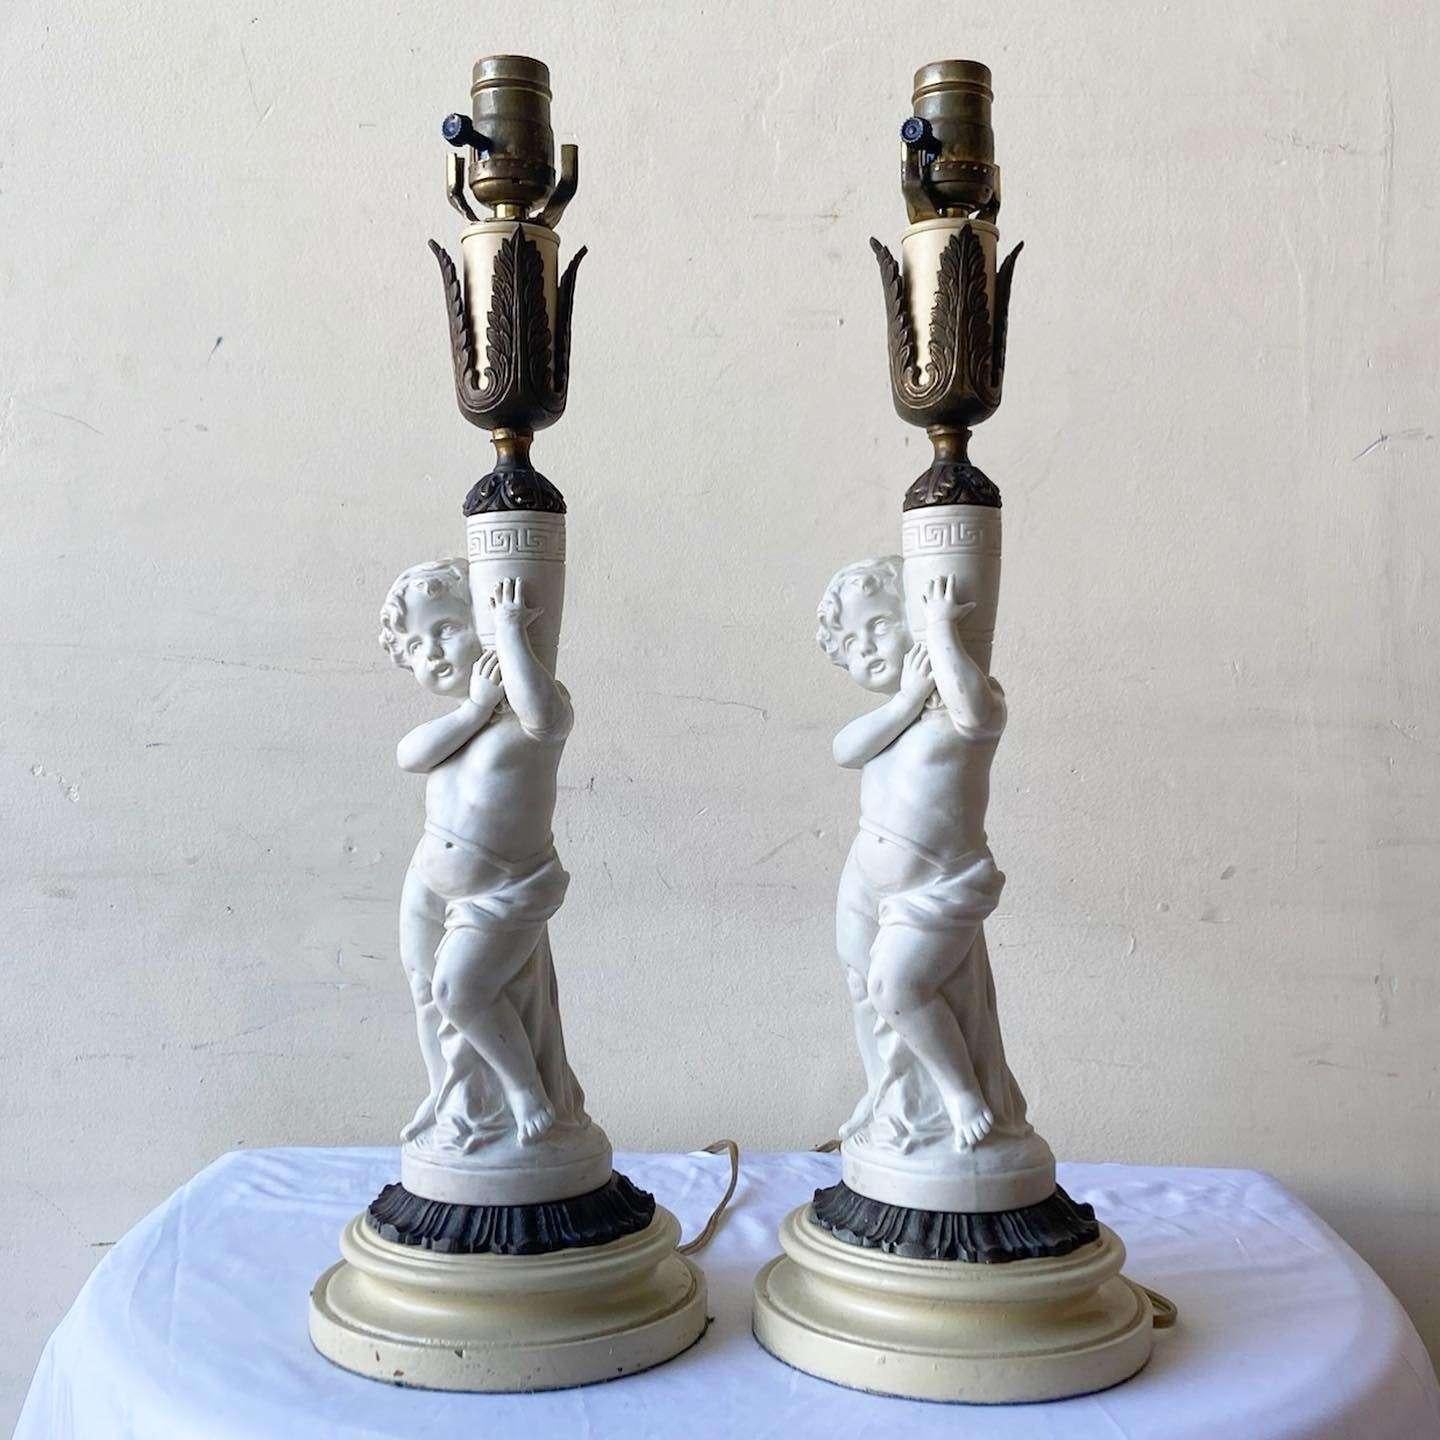 Vintage Ceramic and Brass Cherub Table Lamps In Good Condition For Sale In Delray Beach, FL